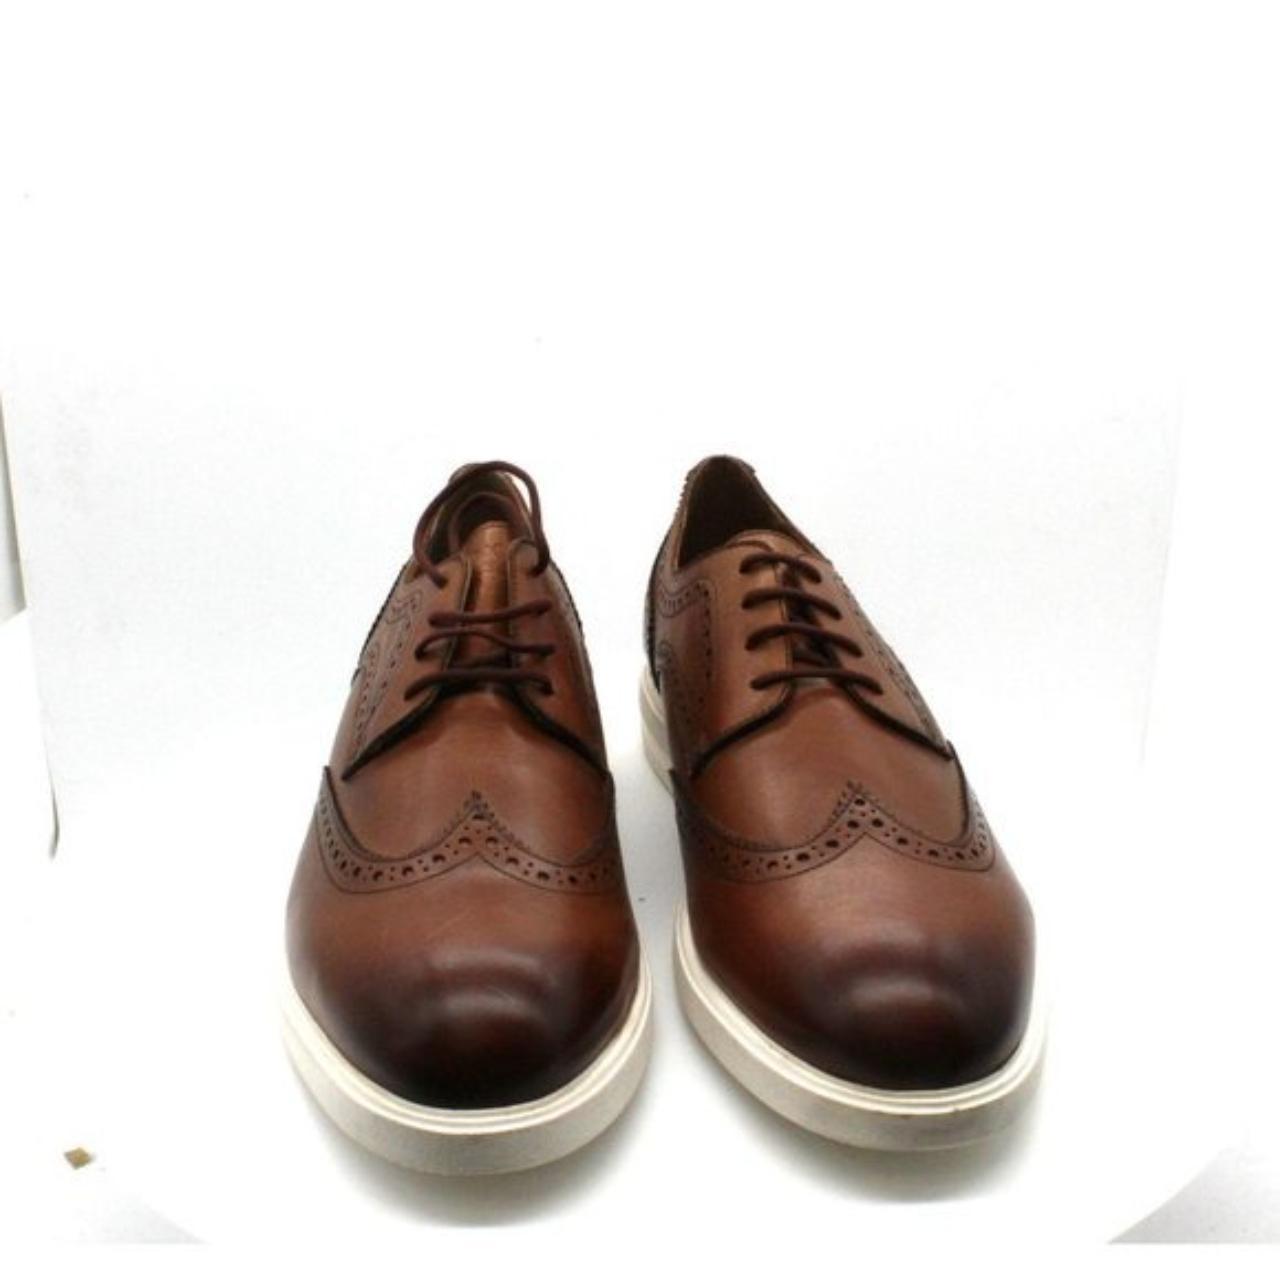 Product Image 4 - The harrison hybrid wingtip is